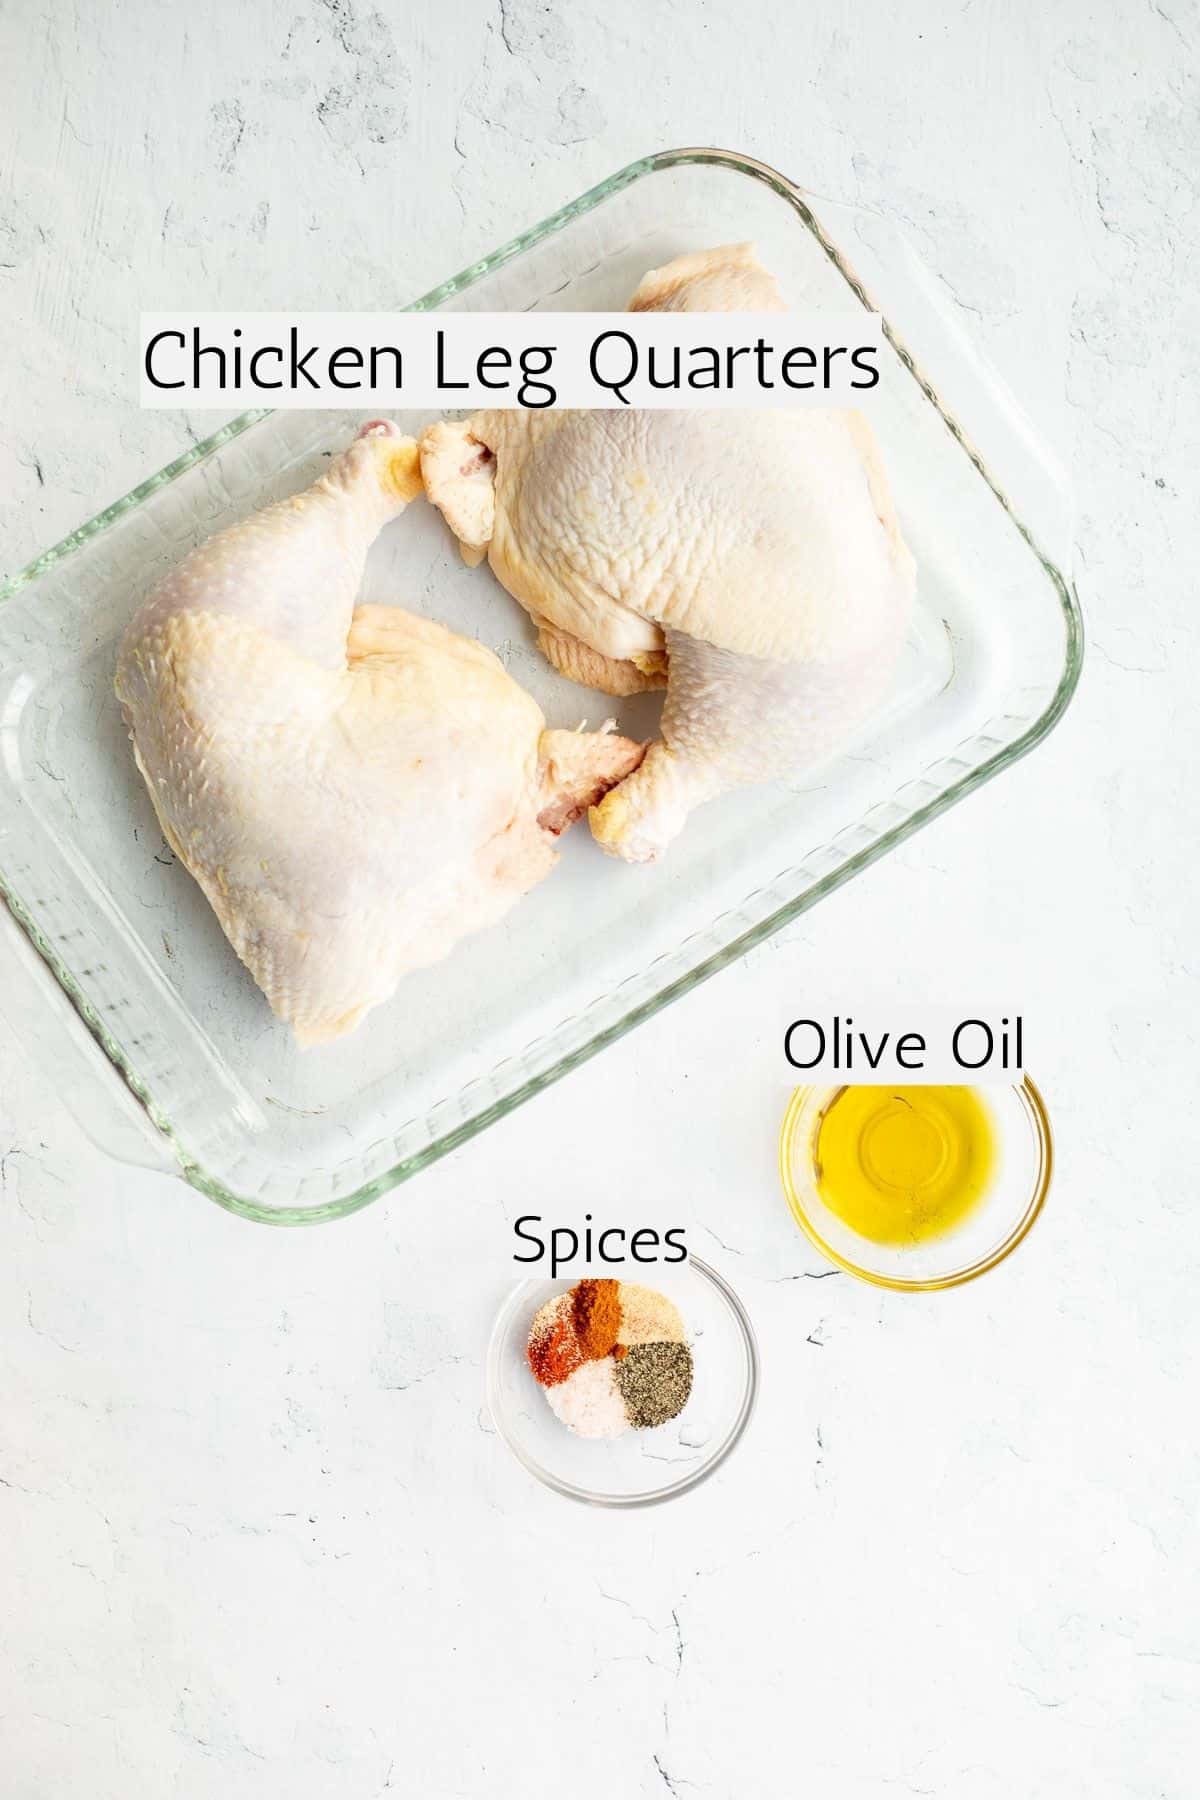 ingredients to make baked chicken leg quarters labeled with black text.